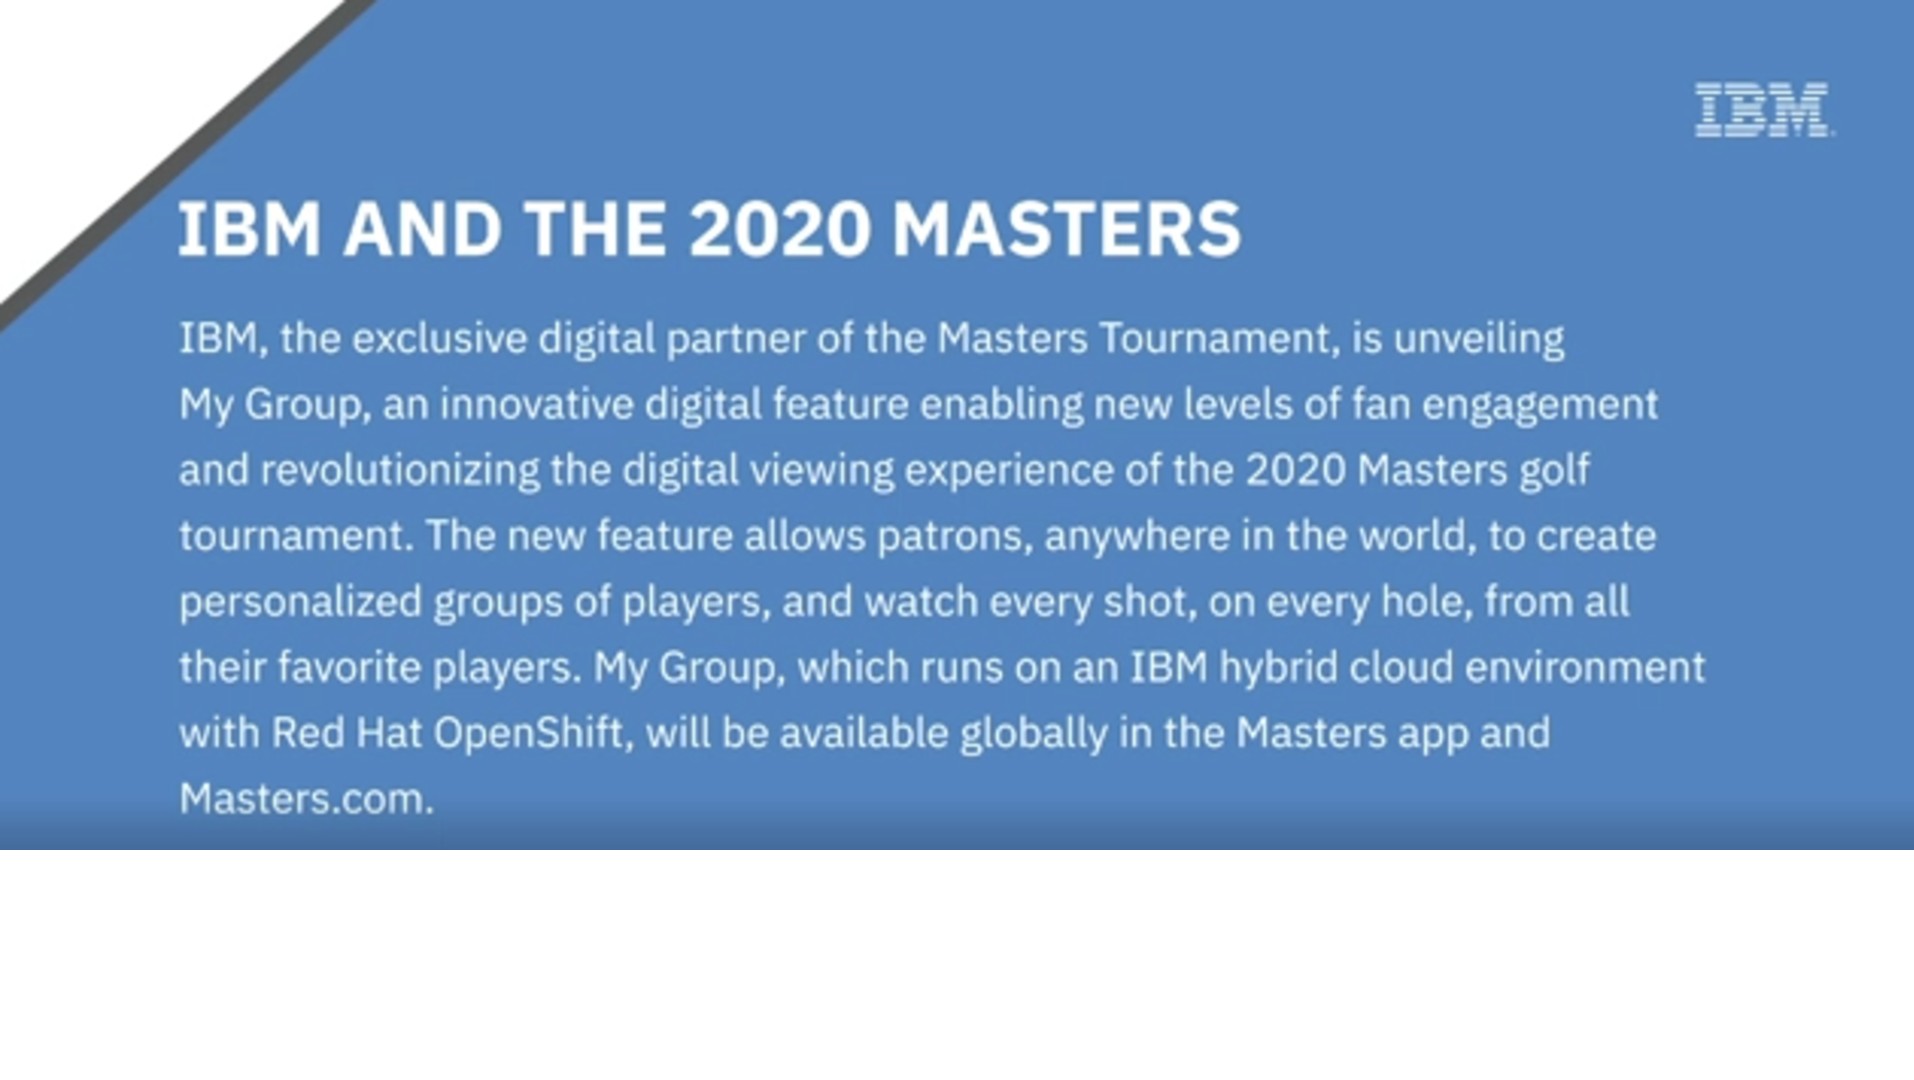 IBM and The Masters B-roll including footage of the new My Group Feature and the Augusta National Golf Club grounds.